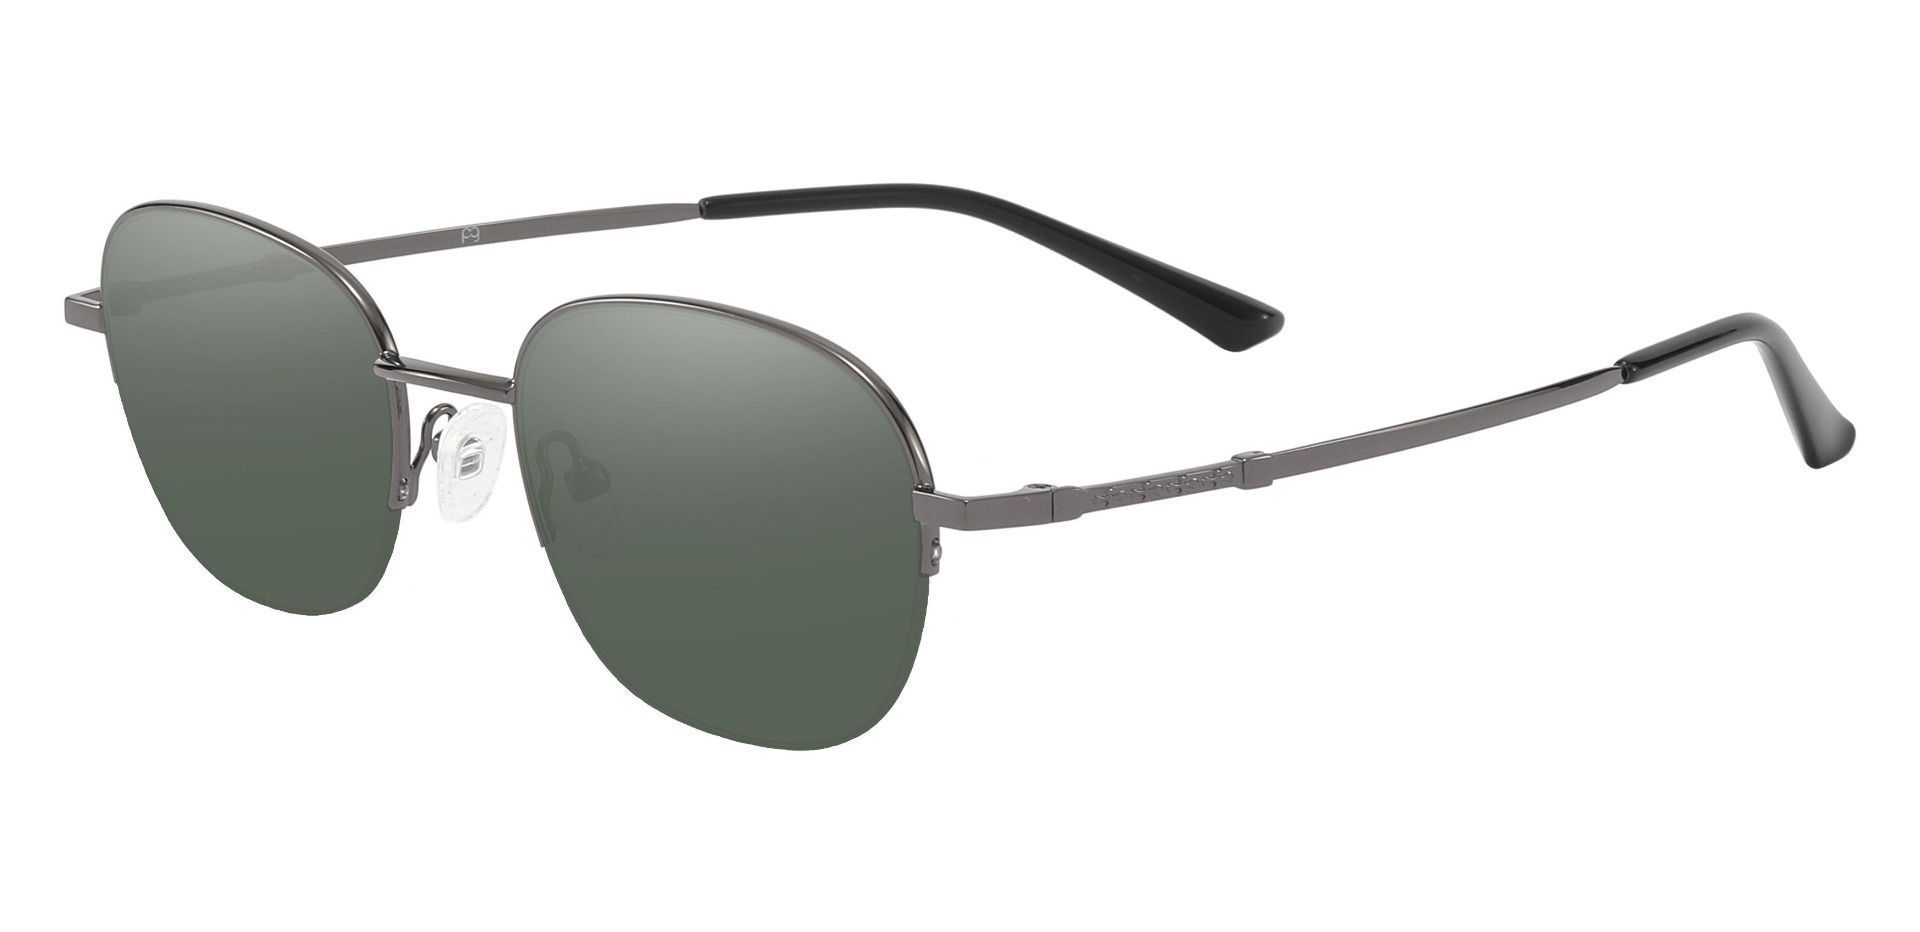 Rochester Oval Non-Rx Sunglasses - Gray Frame With Green Lenses